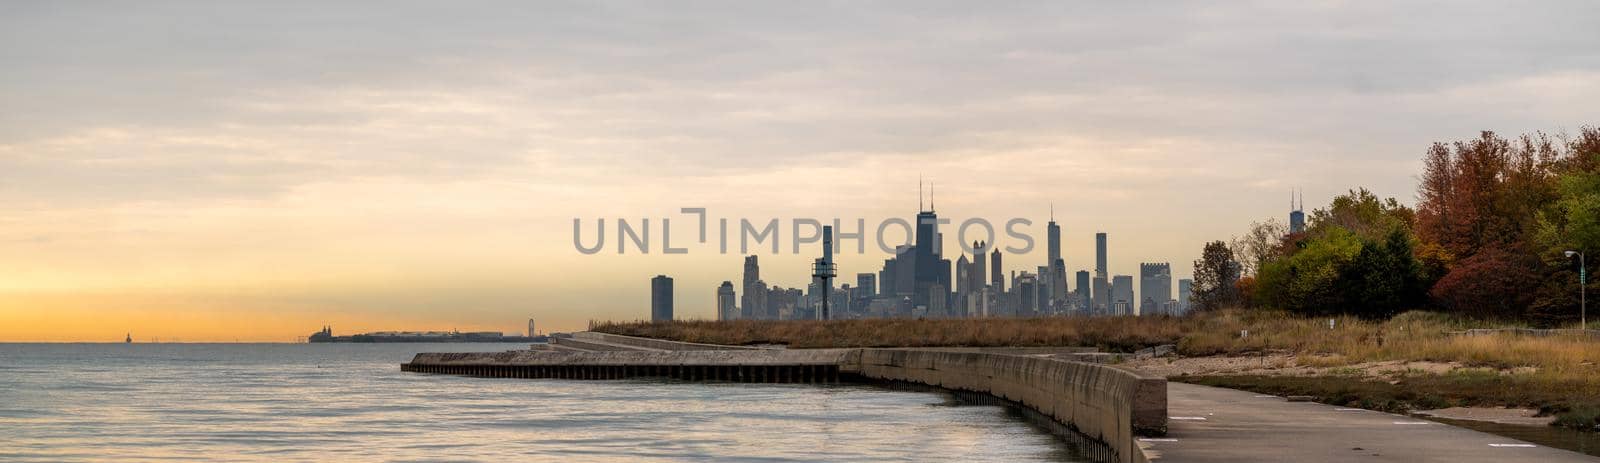 A panorama of the Chicago Skyline at sunrise with orange clouds in the sky and water below in autumn with colorful tree foliage. by lapse_life